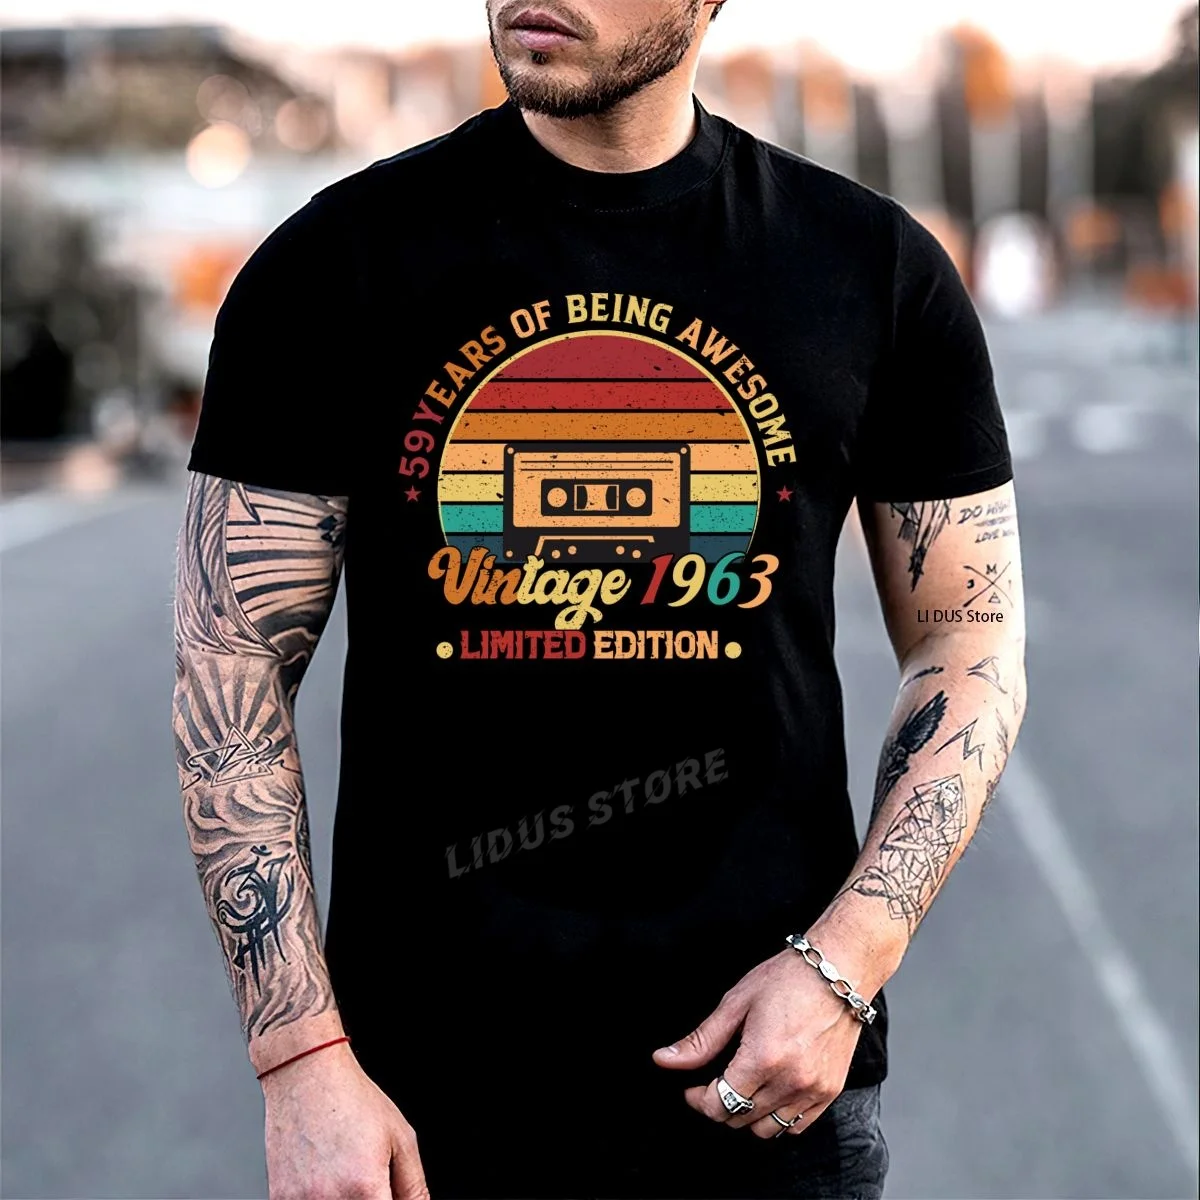 

59 Years Of Being Awesome Vintage 1963 Limited Edition 59th Birthday Gift T-Shirt Clothing Tshirt Sweatshirt Unisex Shirt Tee